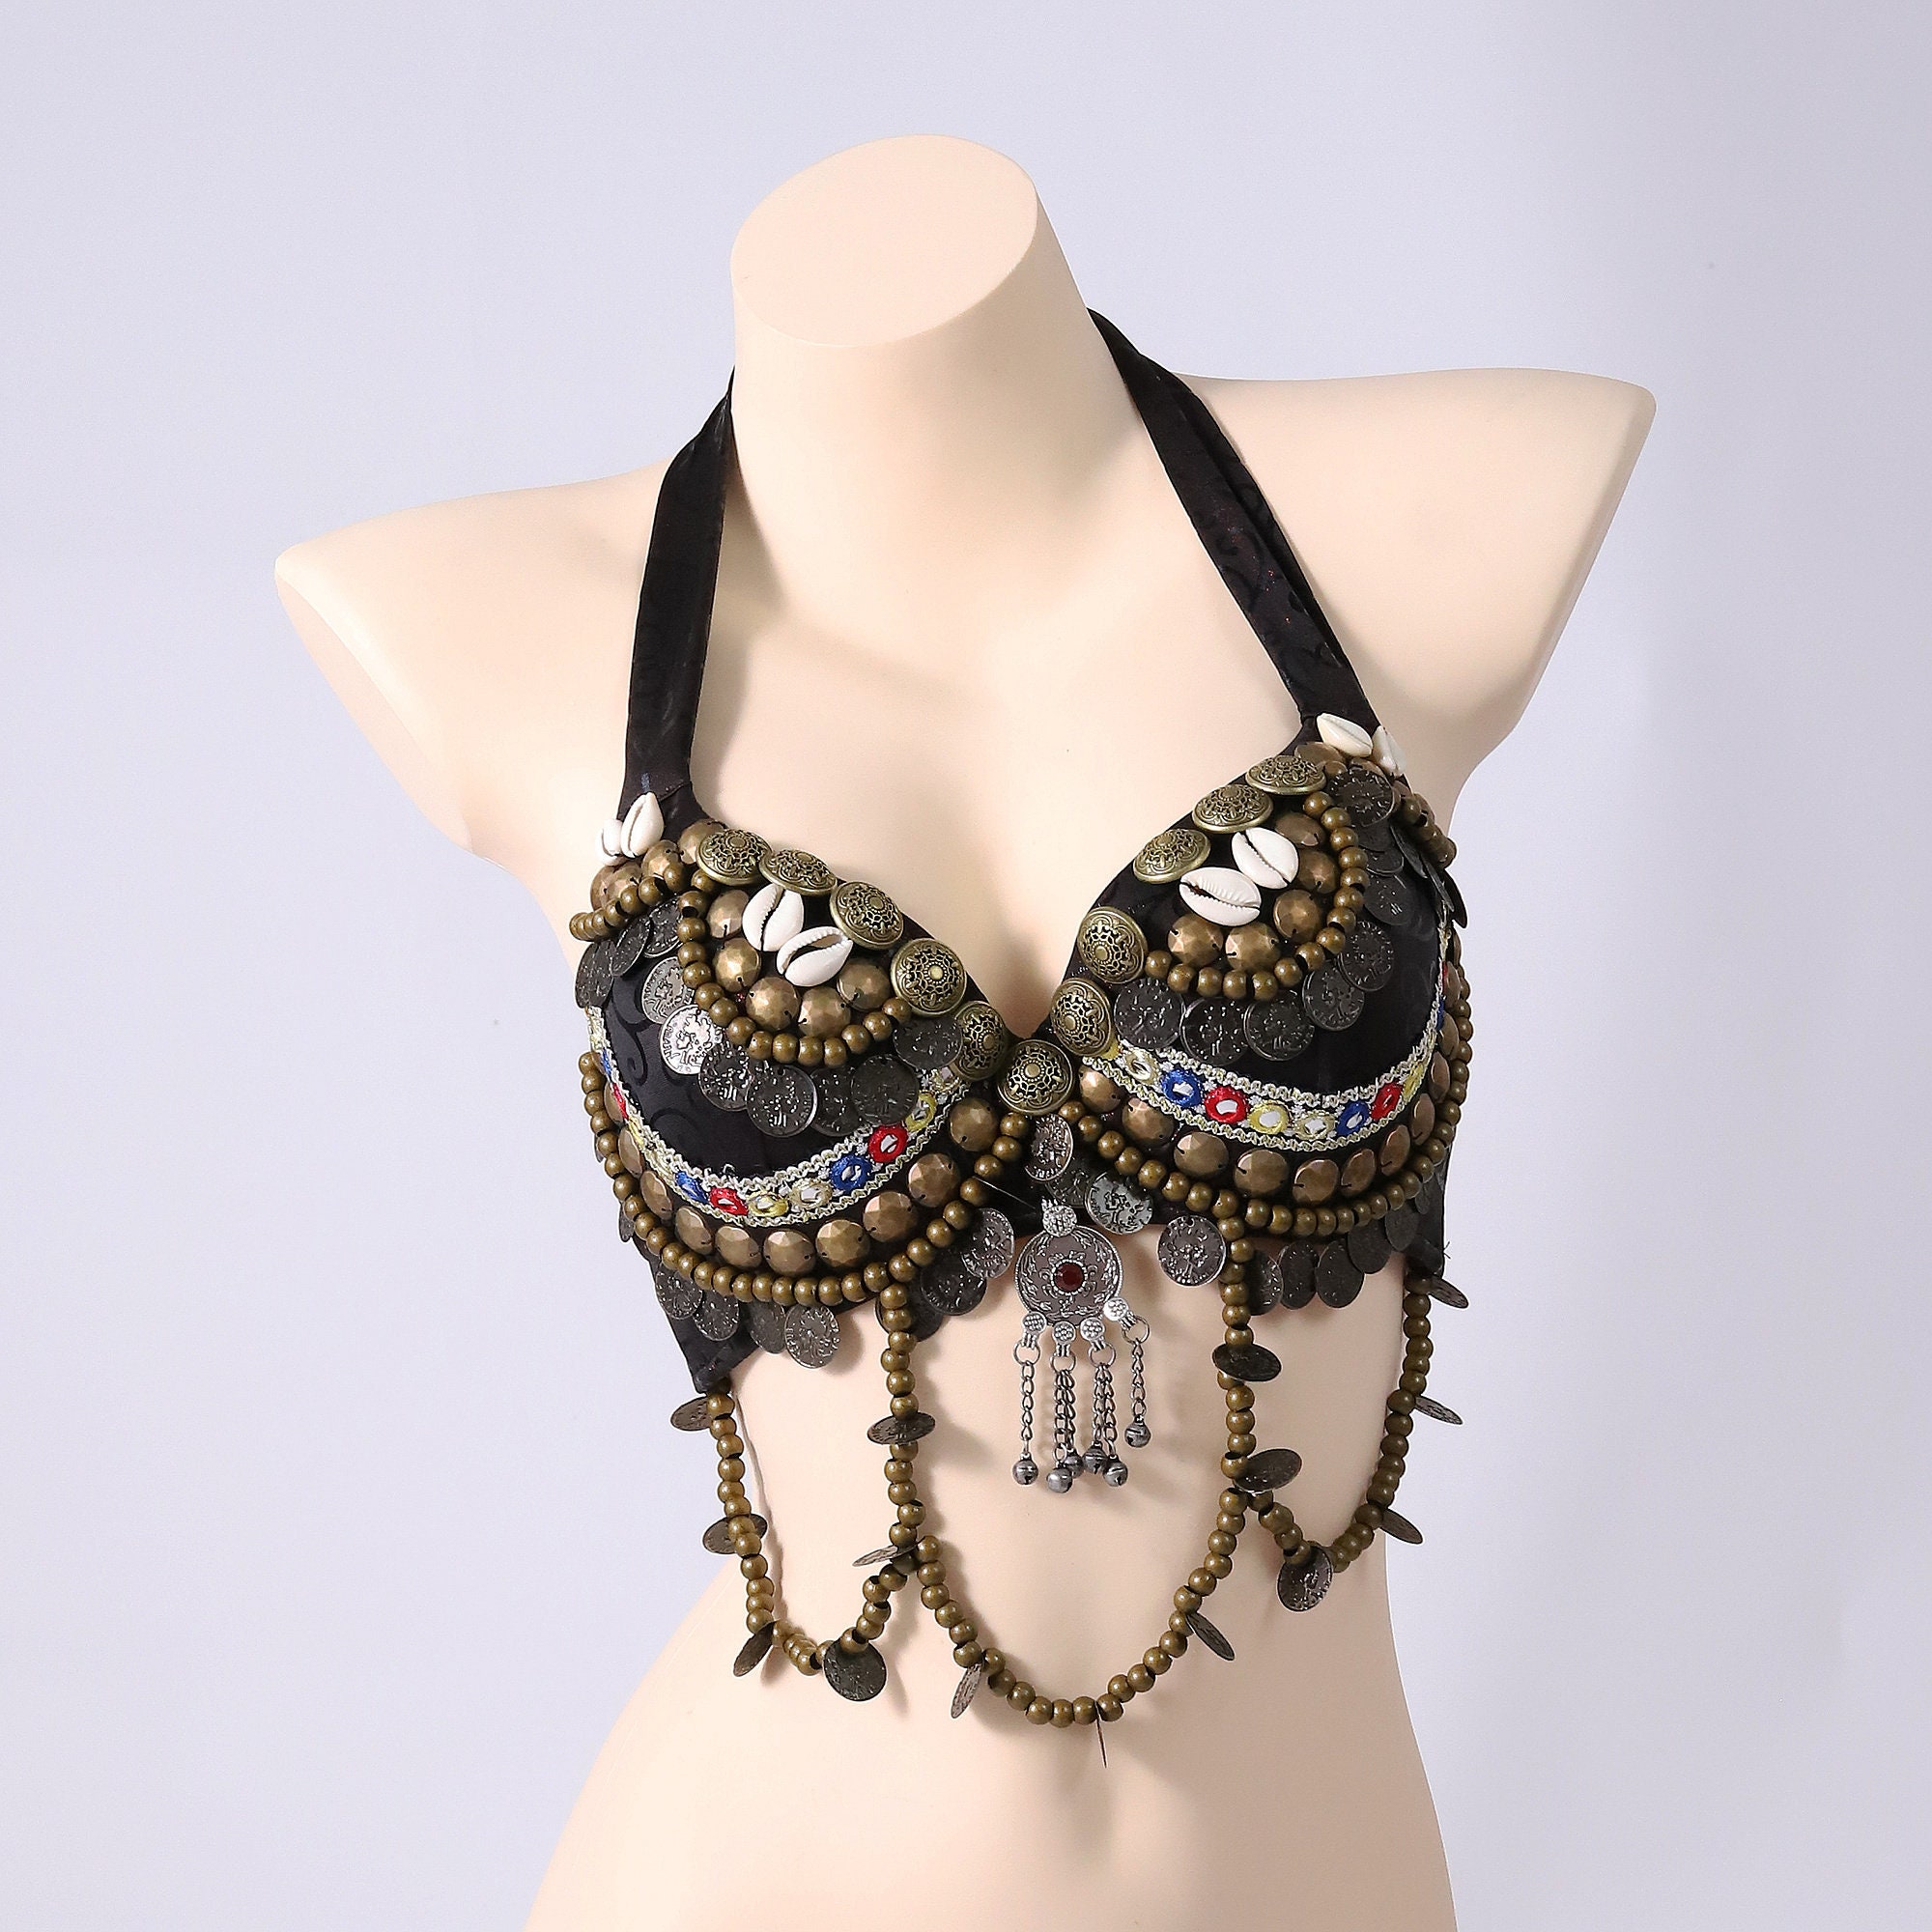 Shiny Tribal Style Belly Dance Bra ATS Tops With Bronze Coins Drapes 